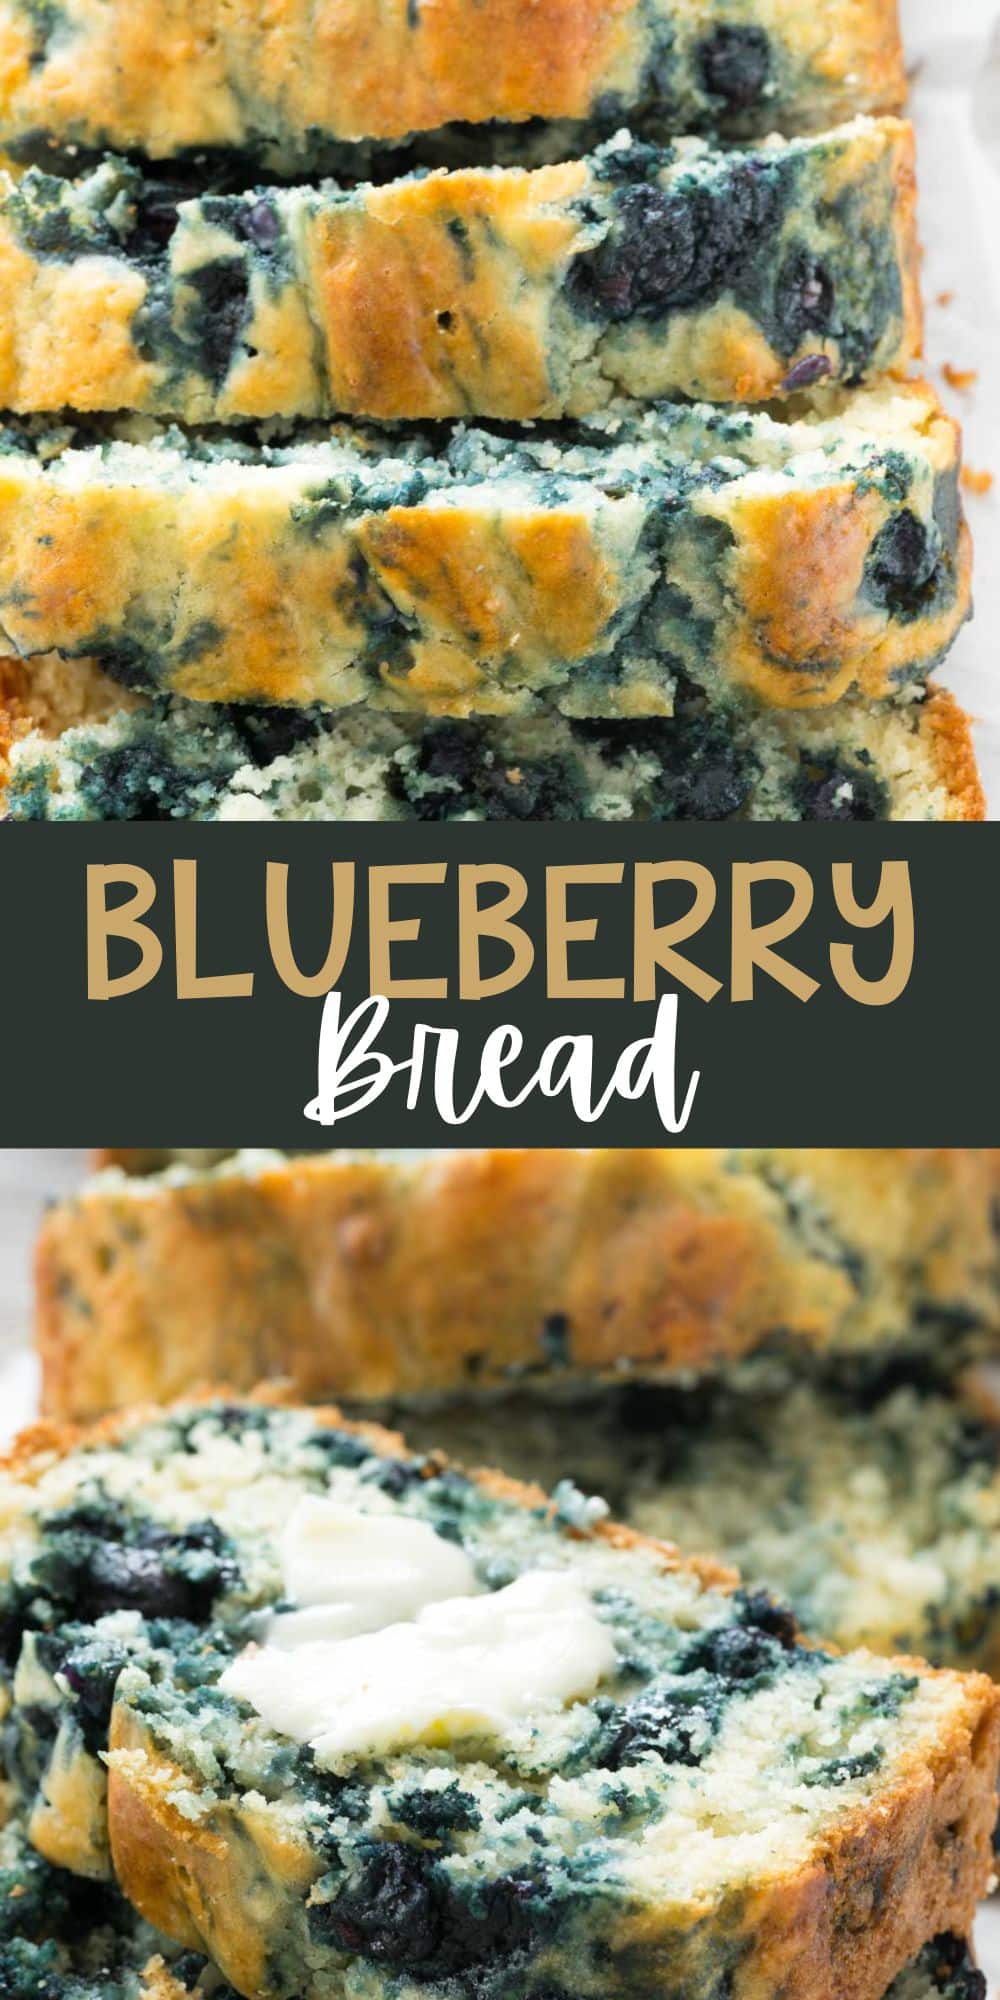 two photos of bread with blueberries baked in and words on the image.